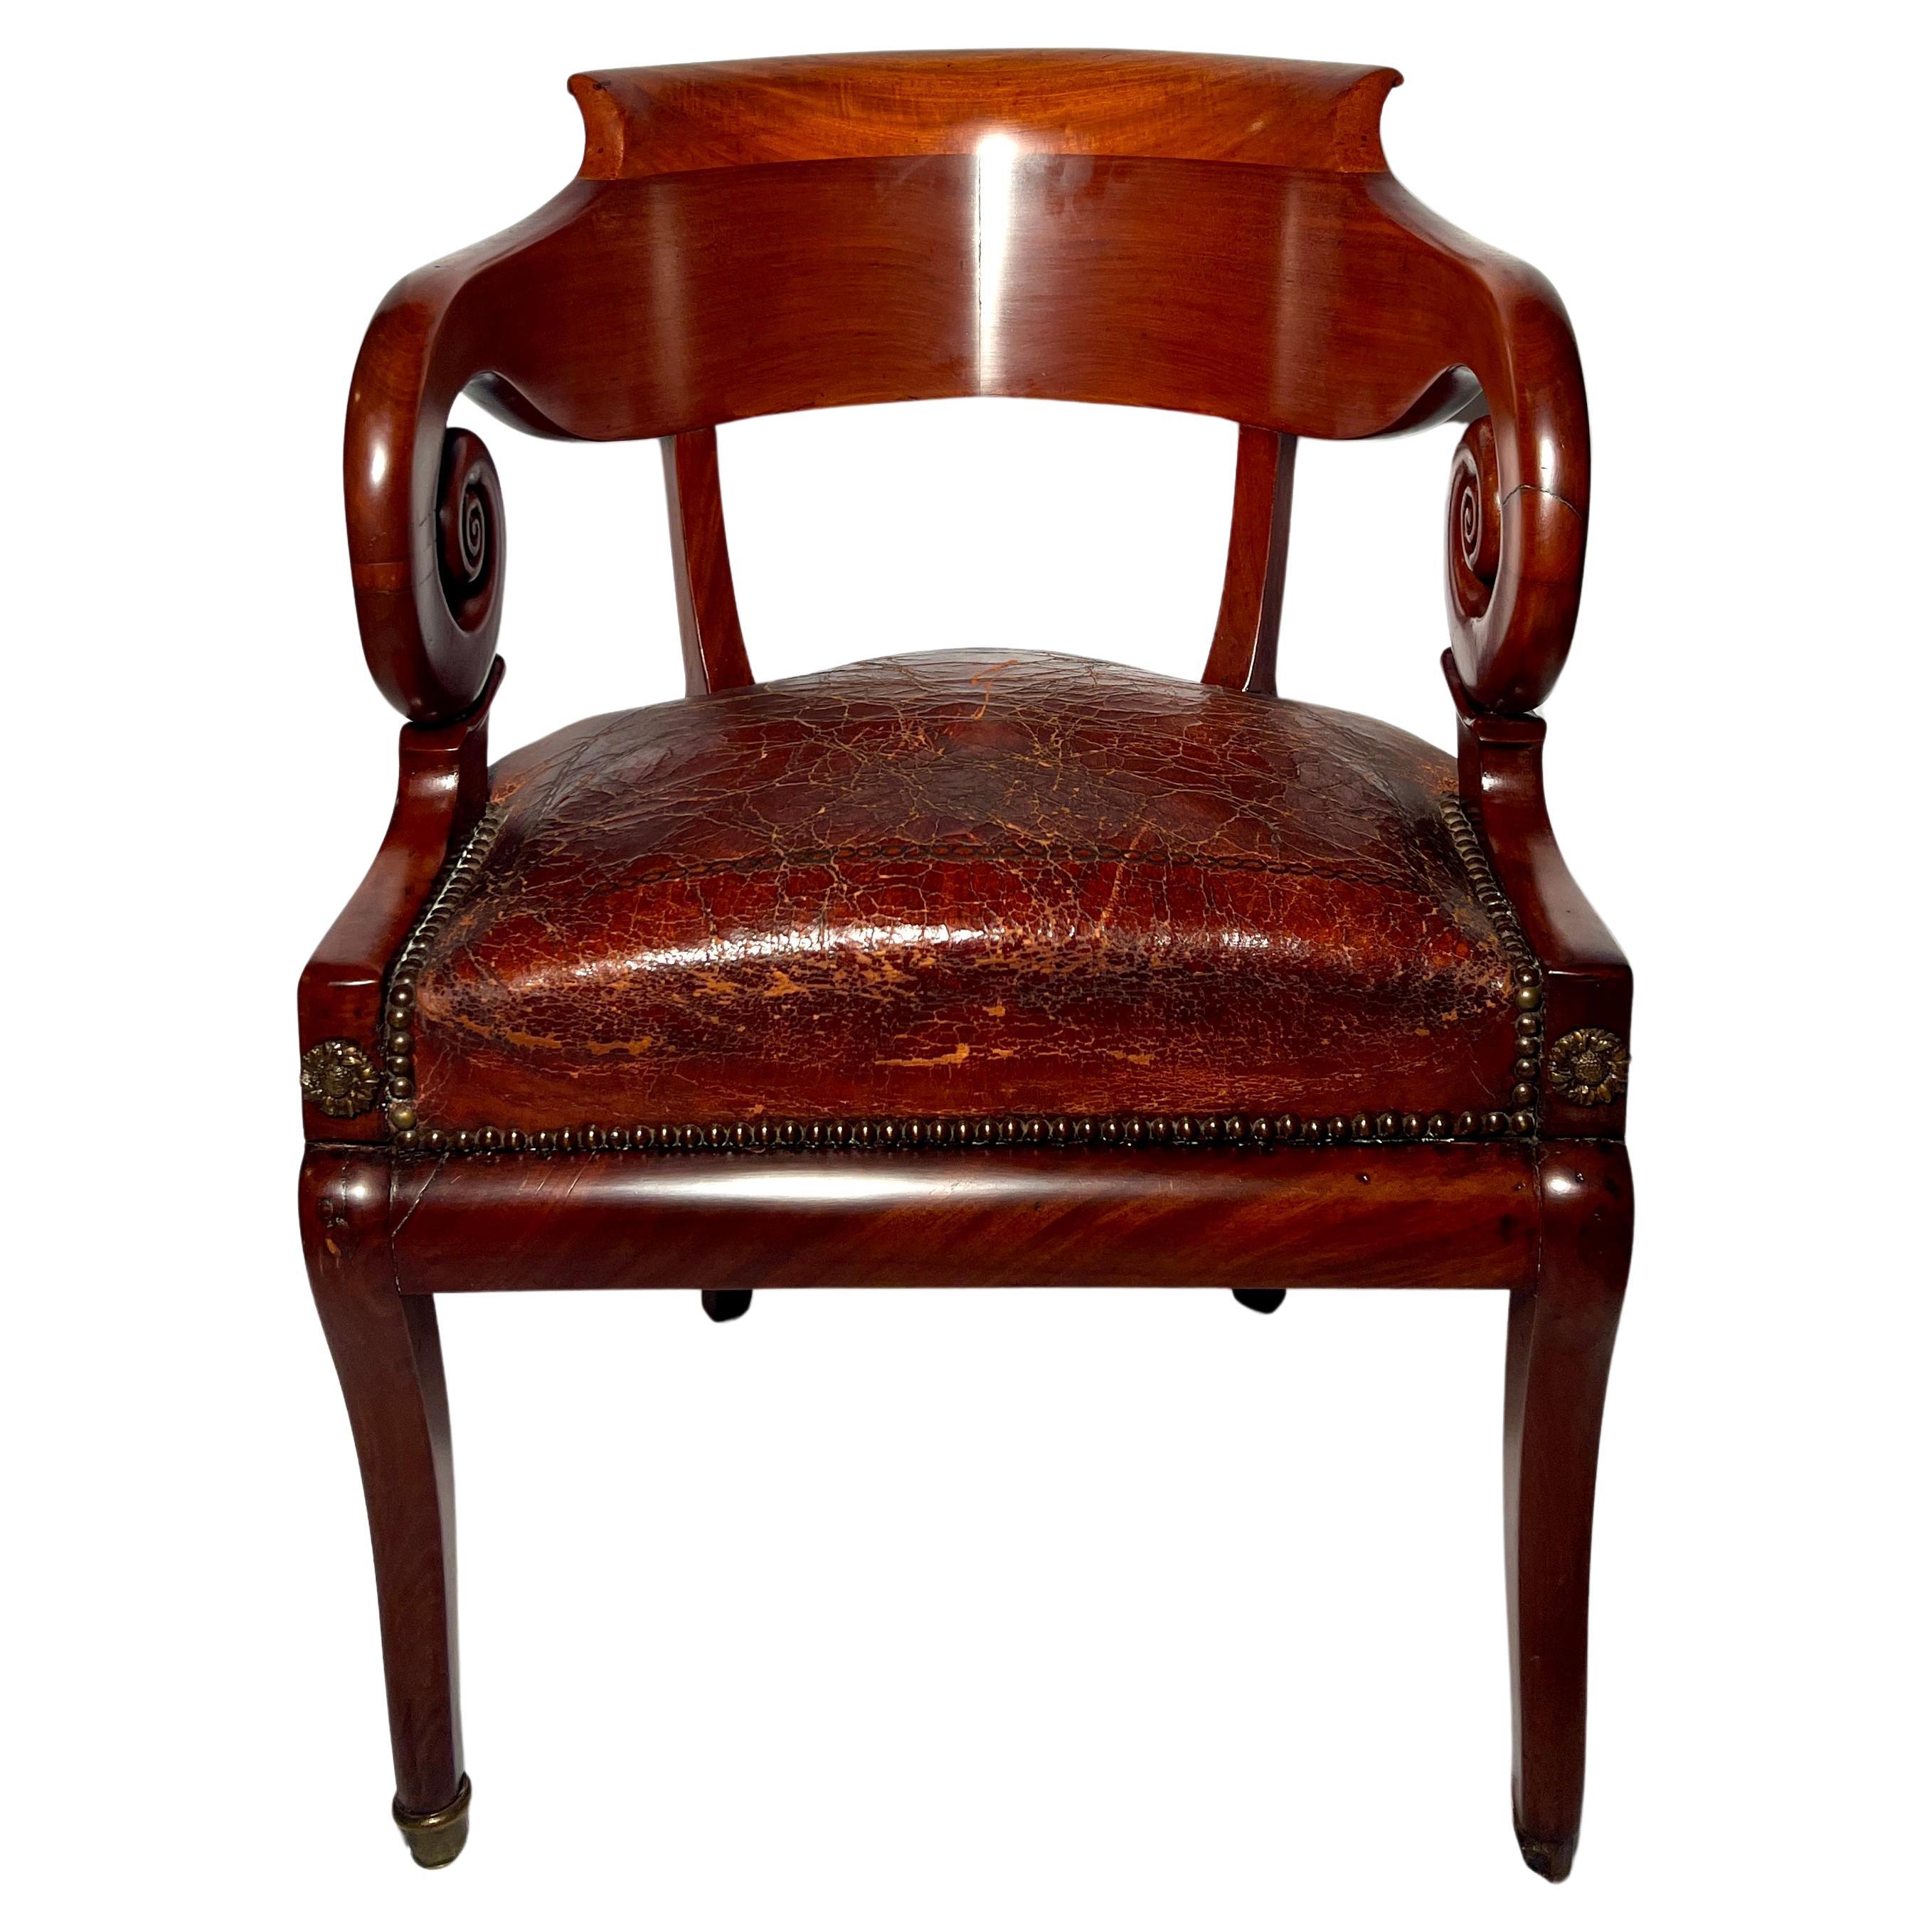 Antique English Solid Mahogany and Leather Desk Chair, Circa 1820. For Sale 1